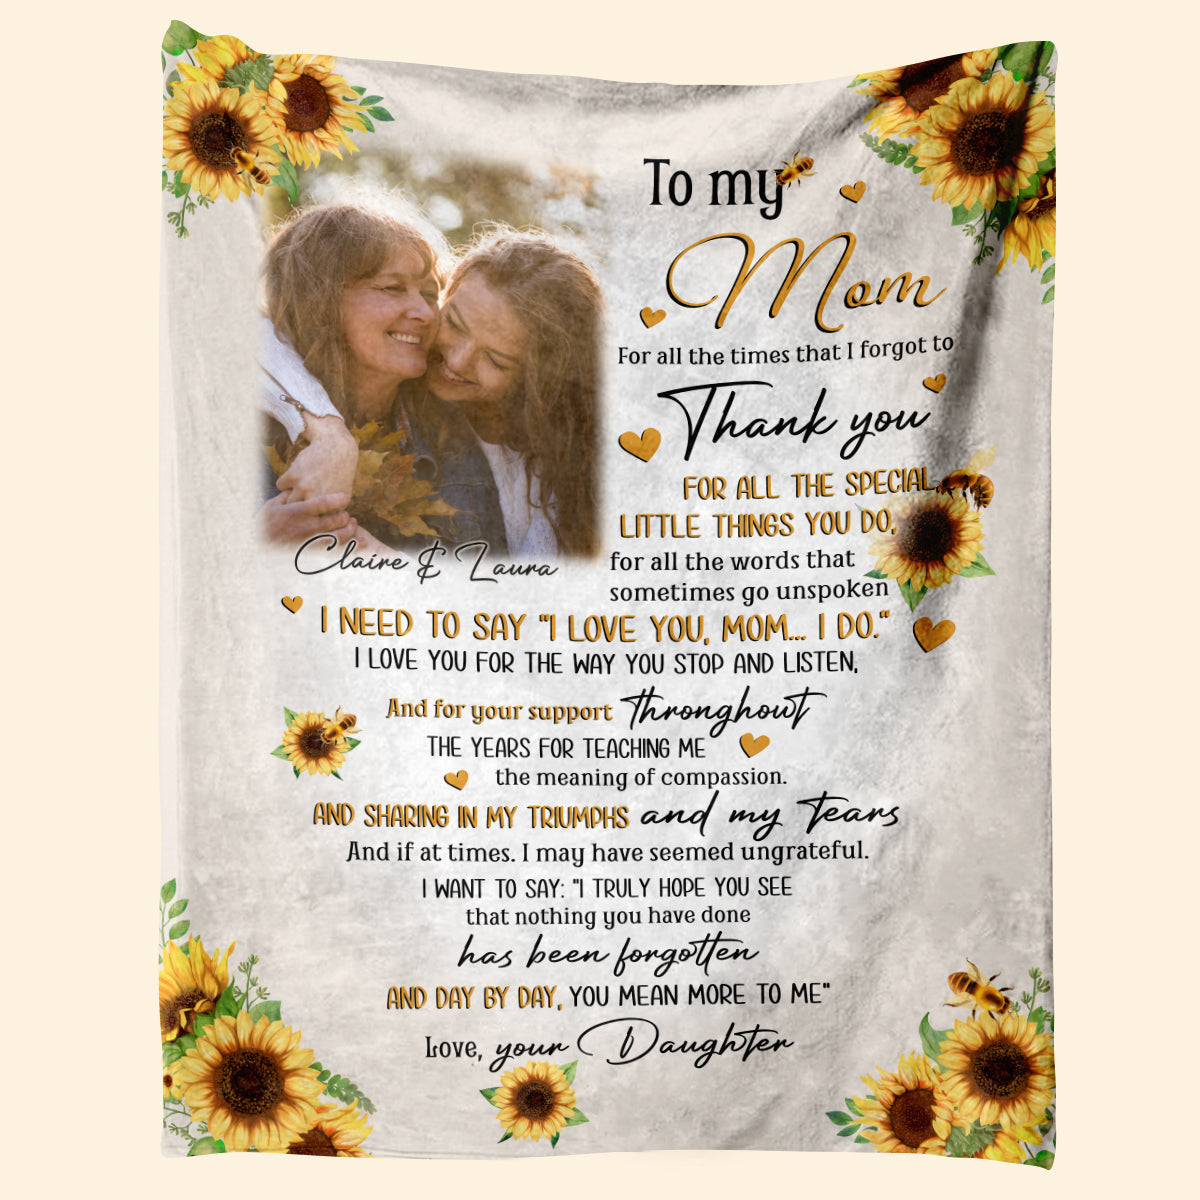 Thank You For Everything You Do - Personalized Blanket - Birthday Mother's Day Gift For Mom, Mum 1_96685390-822b-4d1d-8483-25842d29e832.jpg?v=1678091268